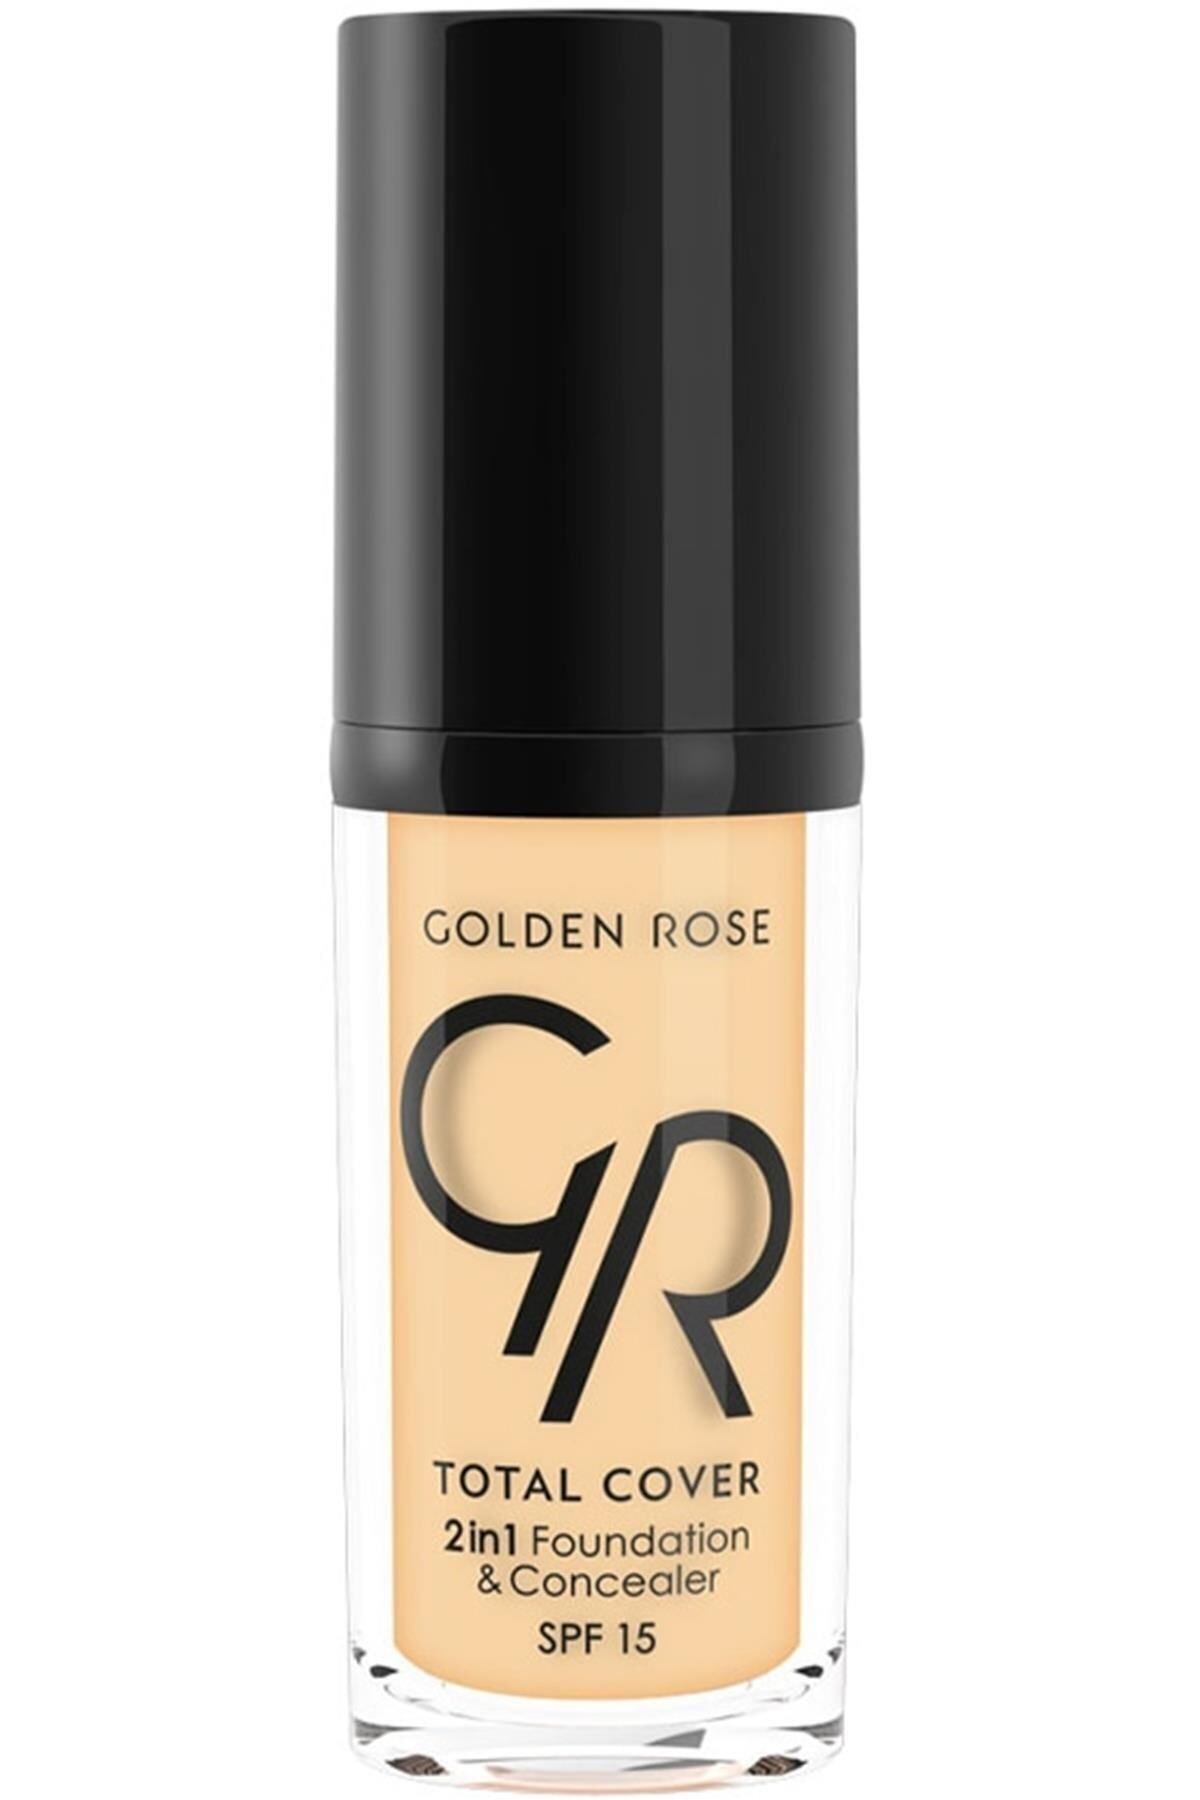 Golden Rose TOTAL COVER 2İN1 FOUNDATİON CONCEALER 21 FOUNDATİON THAT FİLLS THE LİNES DKHAİR480